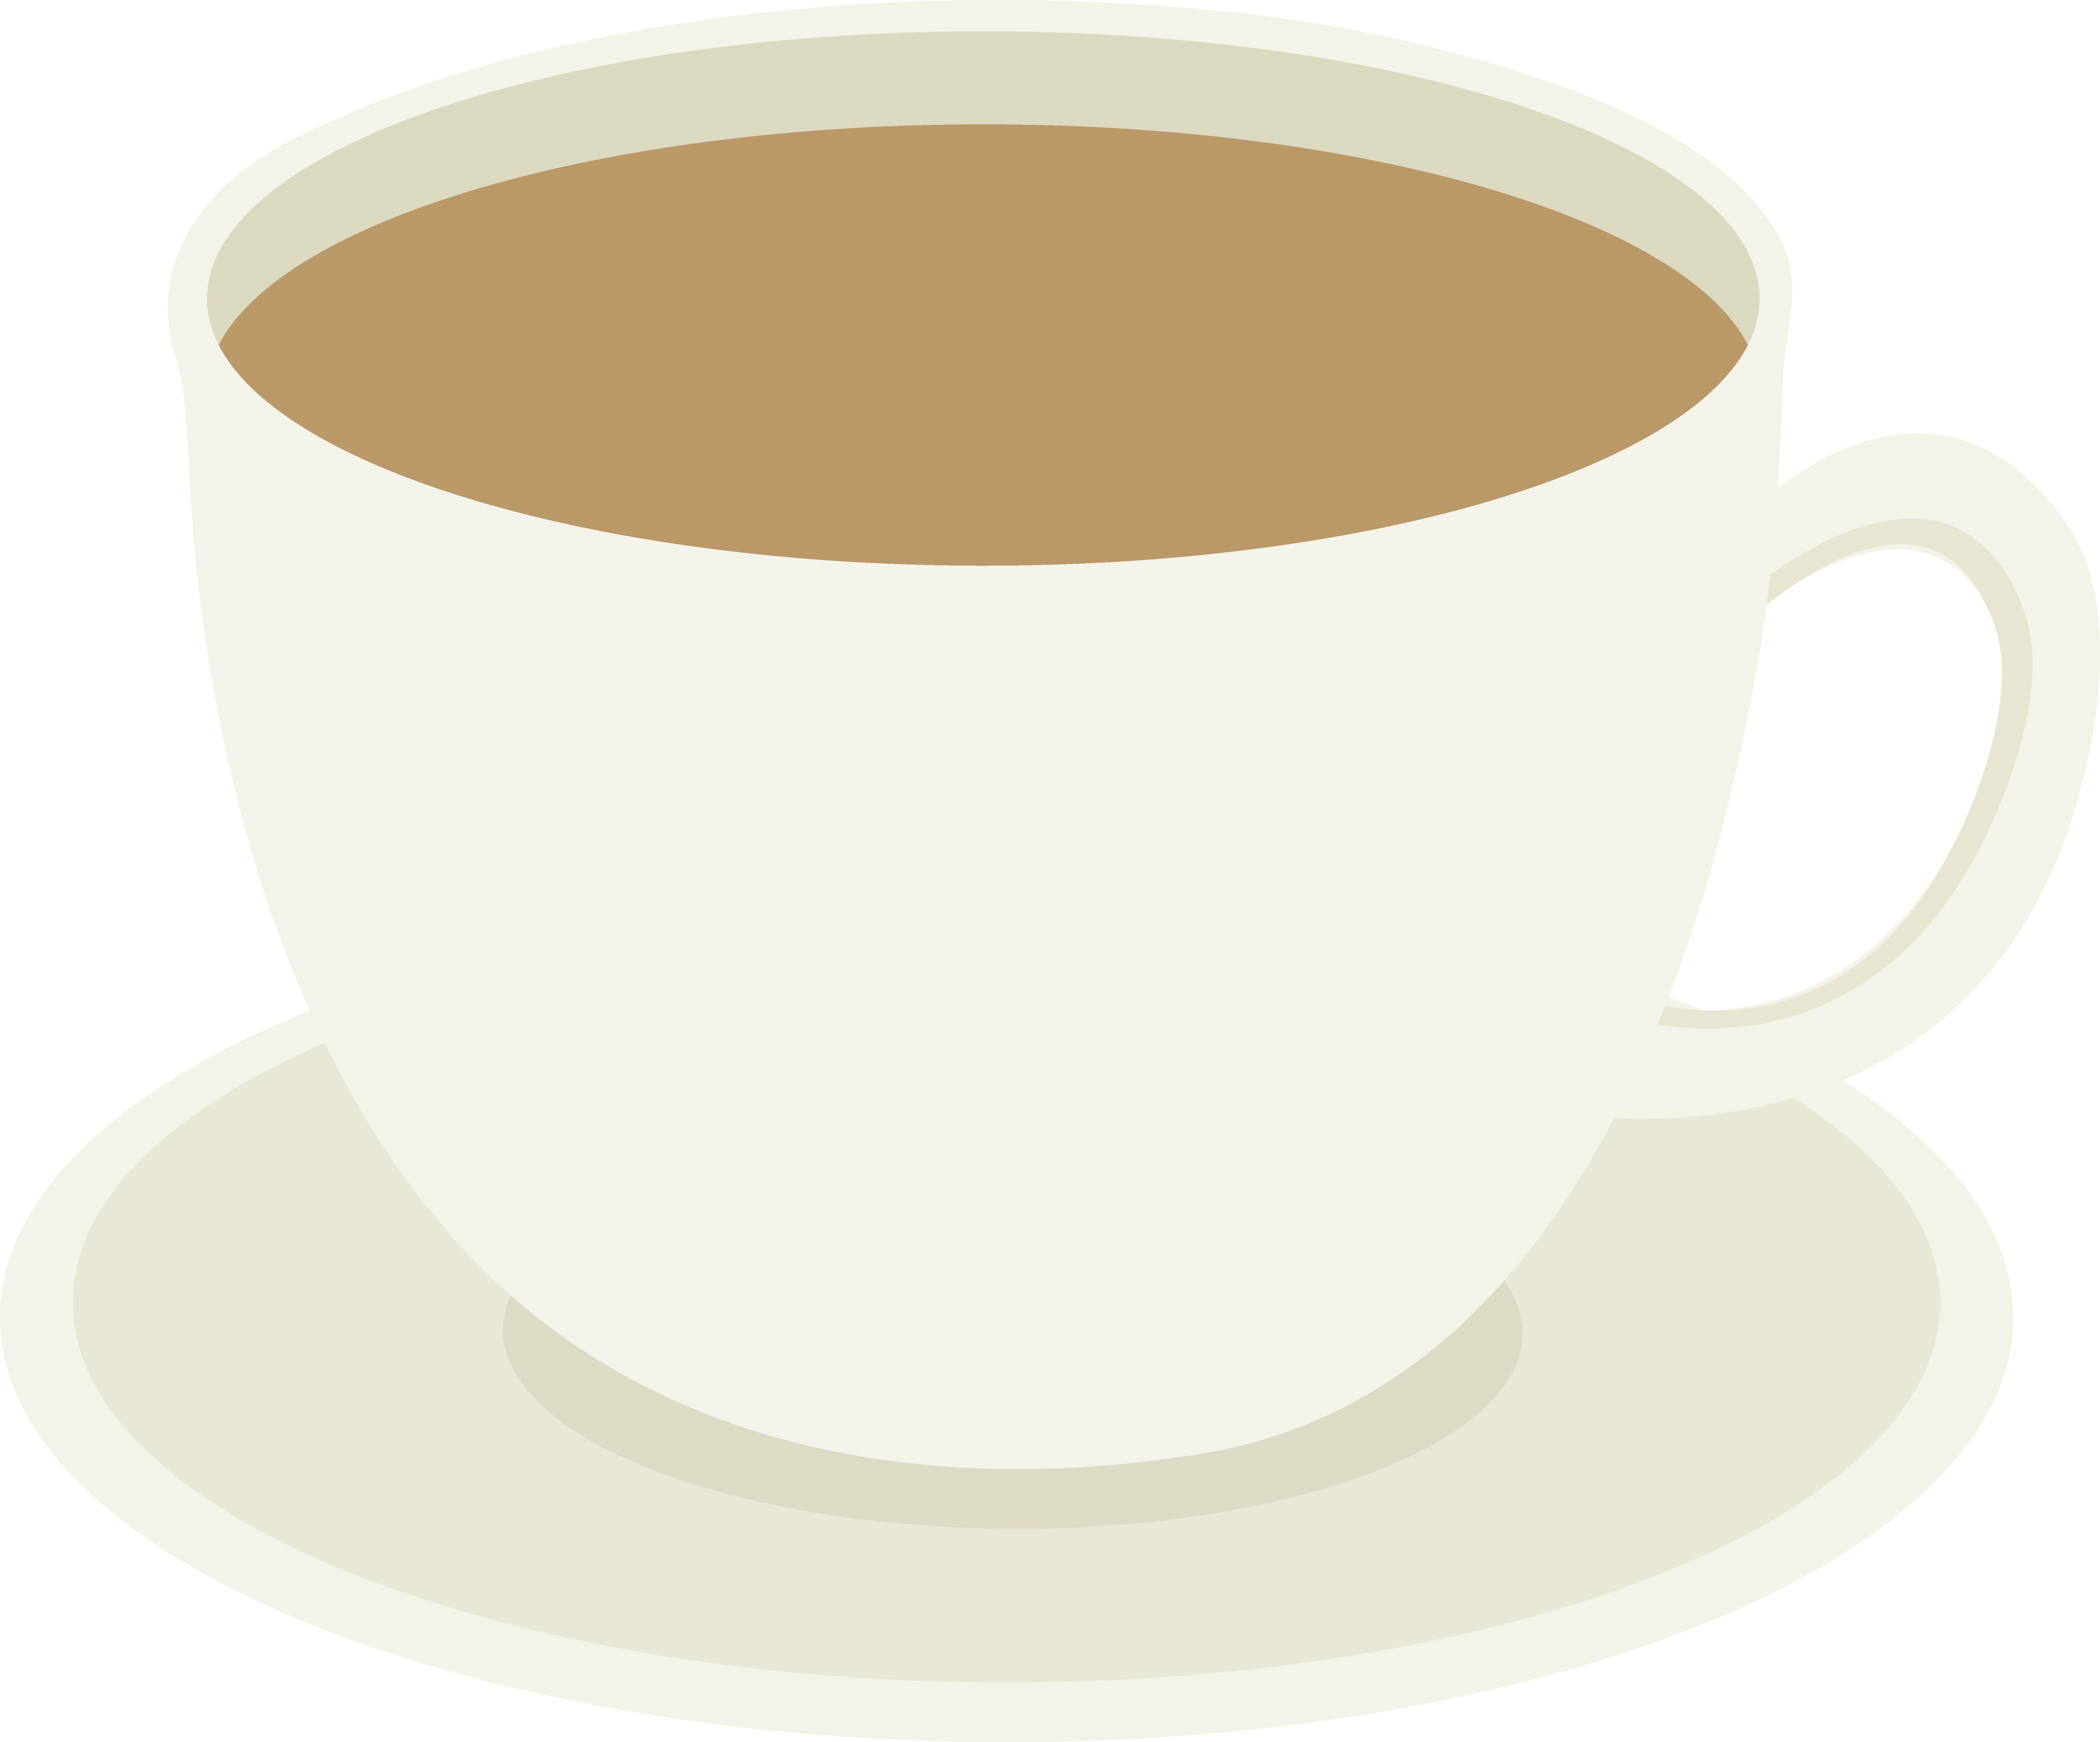 Free Pics Of Coffee Cups, Download Free Pics Of Coffee Cups png images